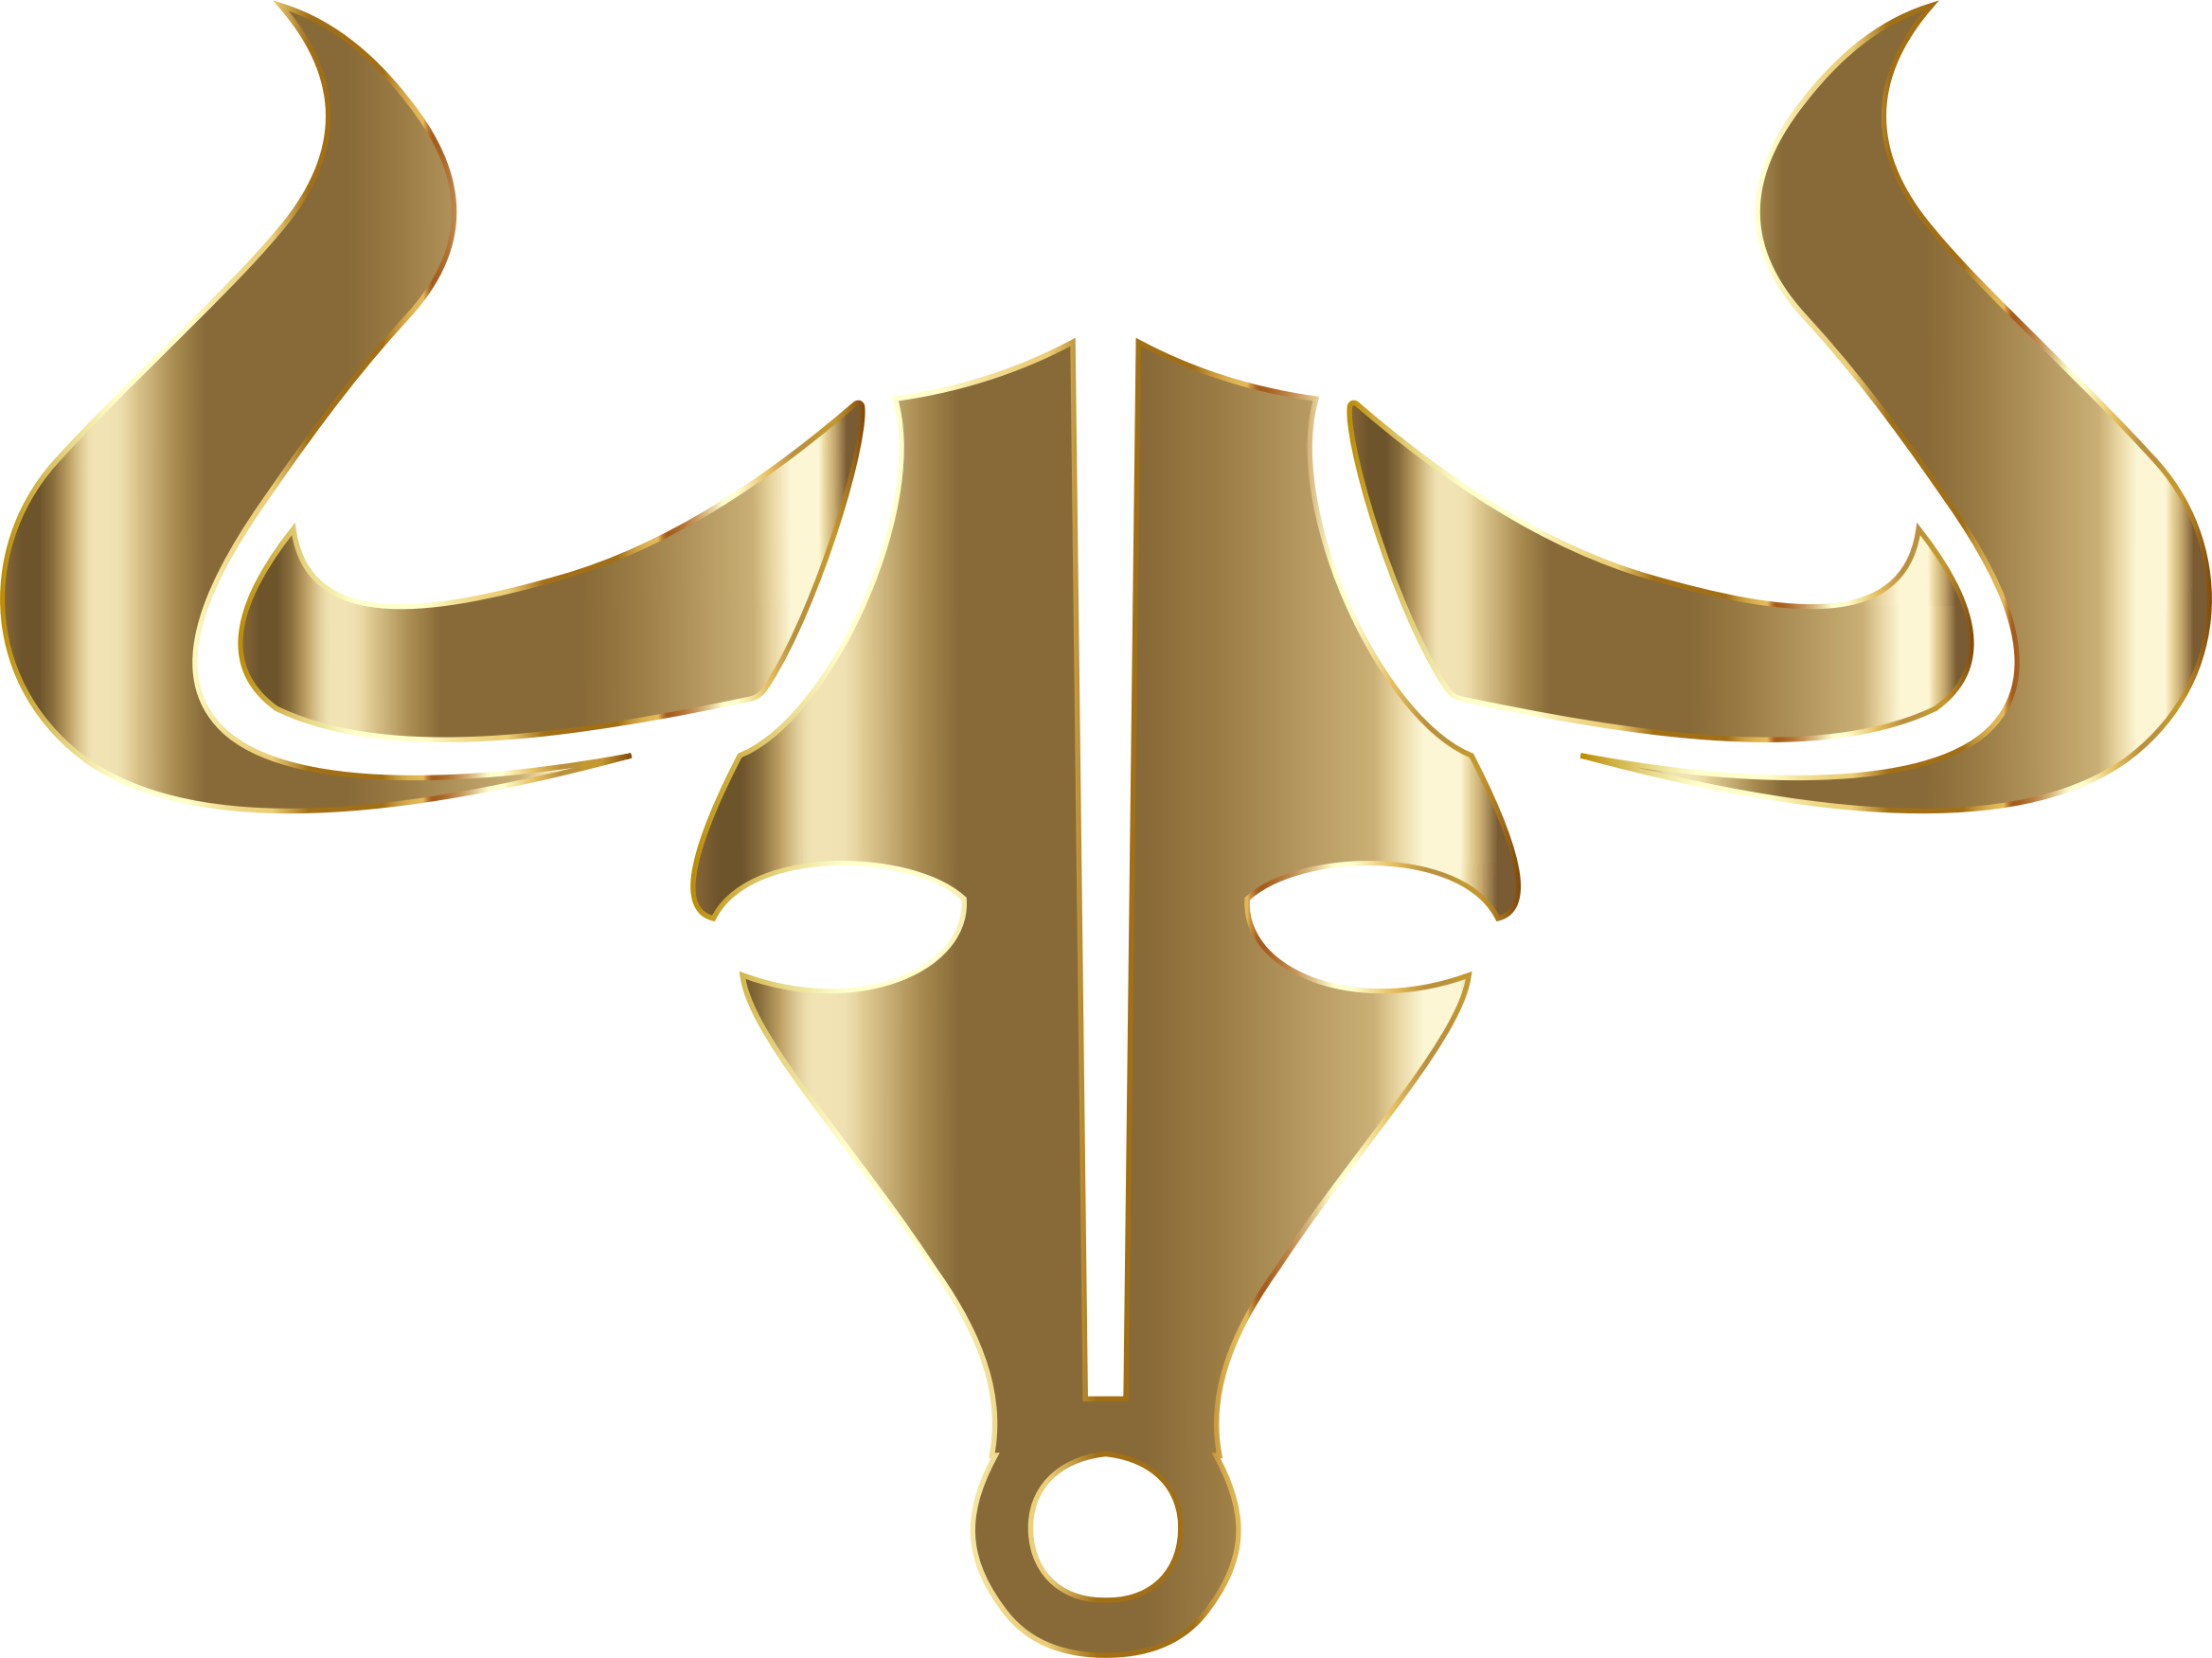 Bull By The Horns PNG - 145541